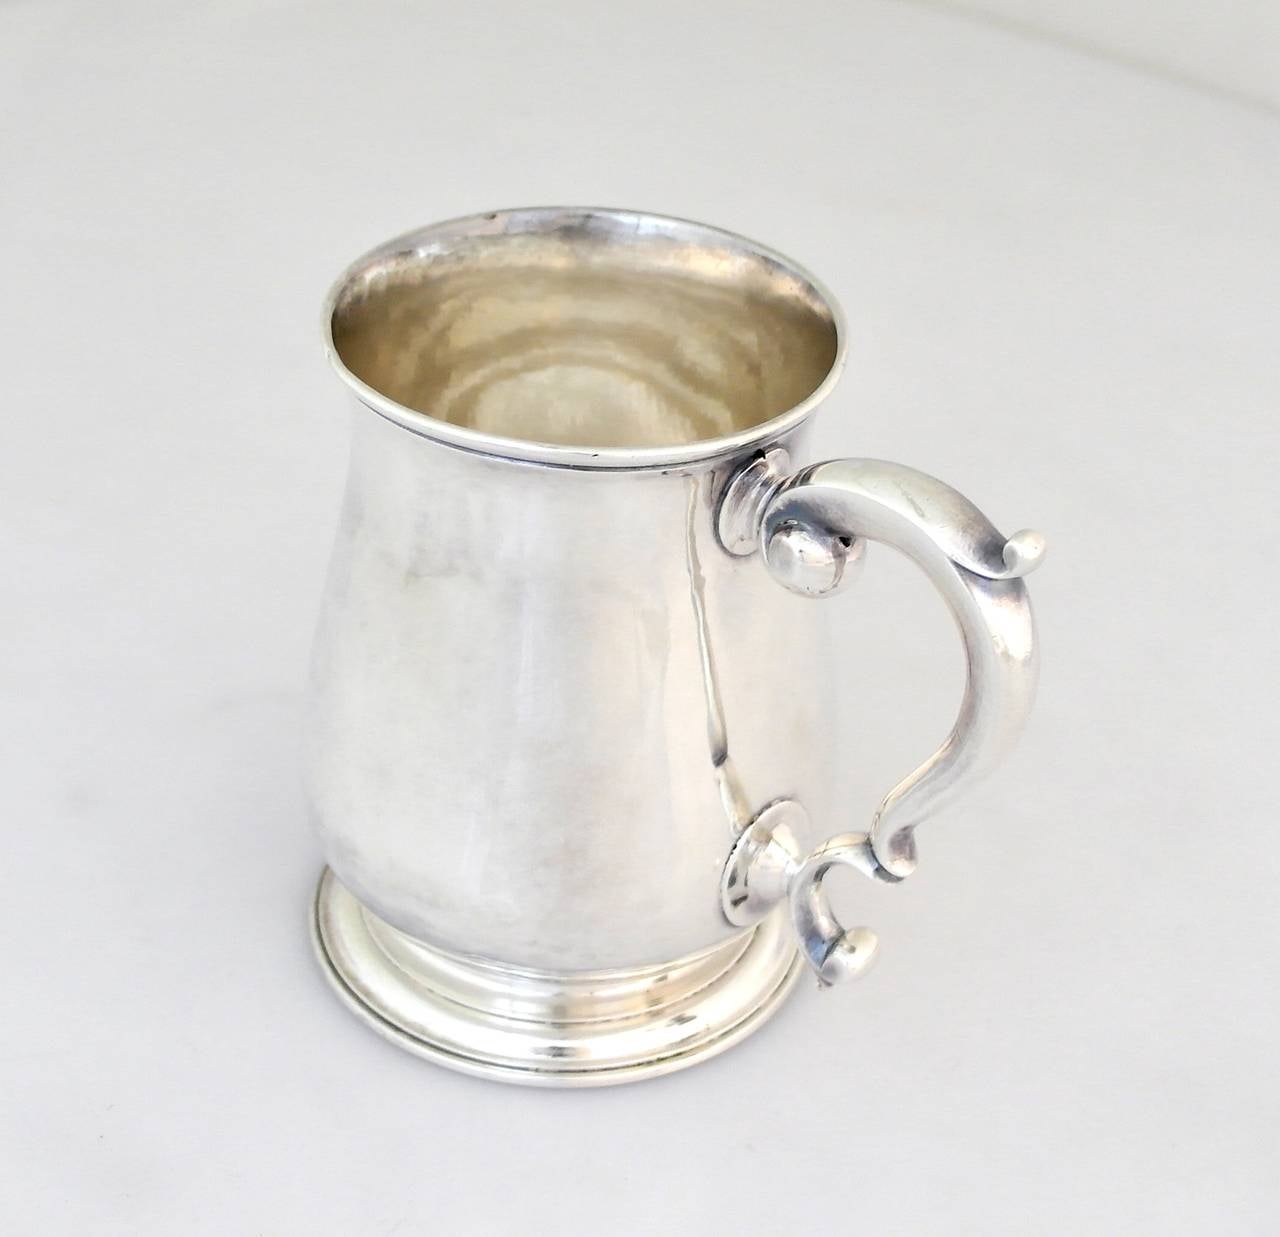 Being offered is a scarce, circa 1745 sterling silver tankard by Richard Bayley of London. Comprising a heavy gauge baluster form body with double scroll handle, on a raised circular foot. Dimensions: 4 3/4 inches height, 3 3/4 inches diameter at